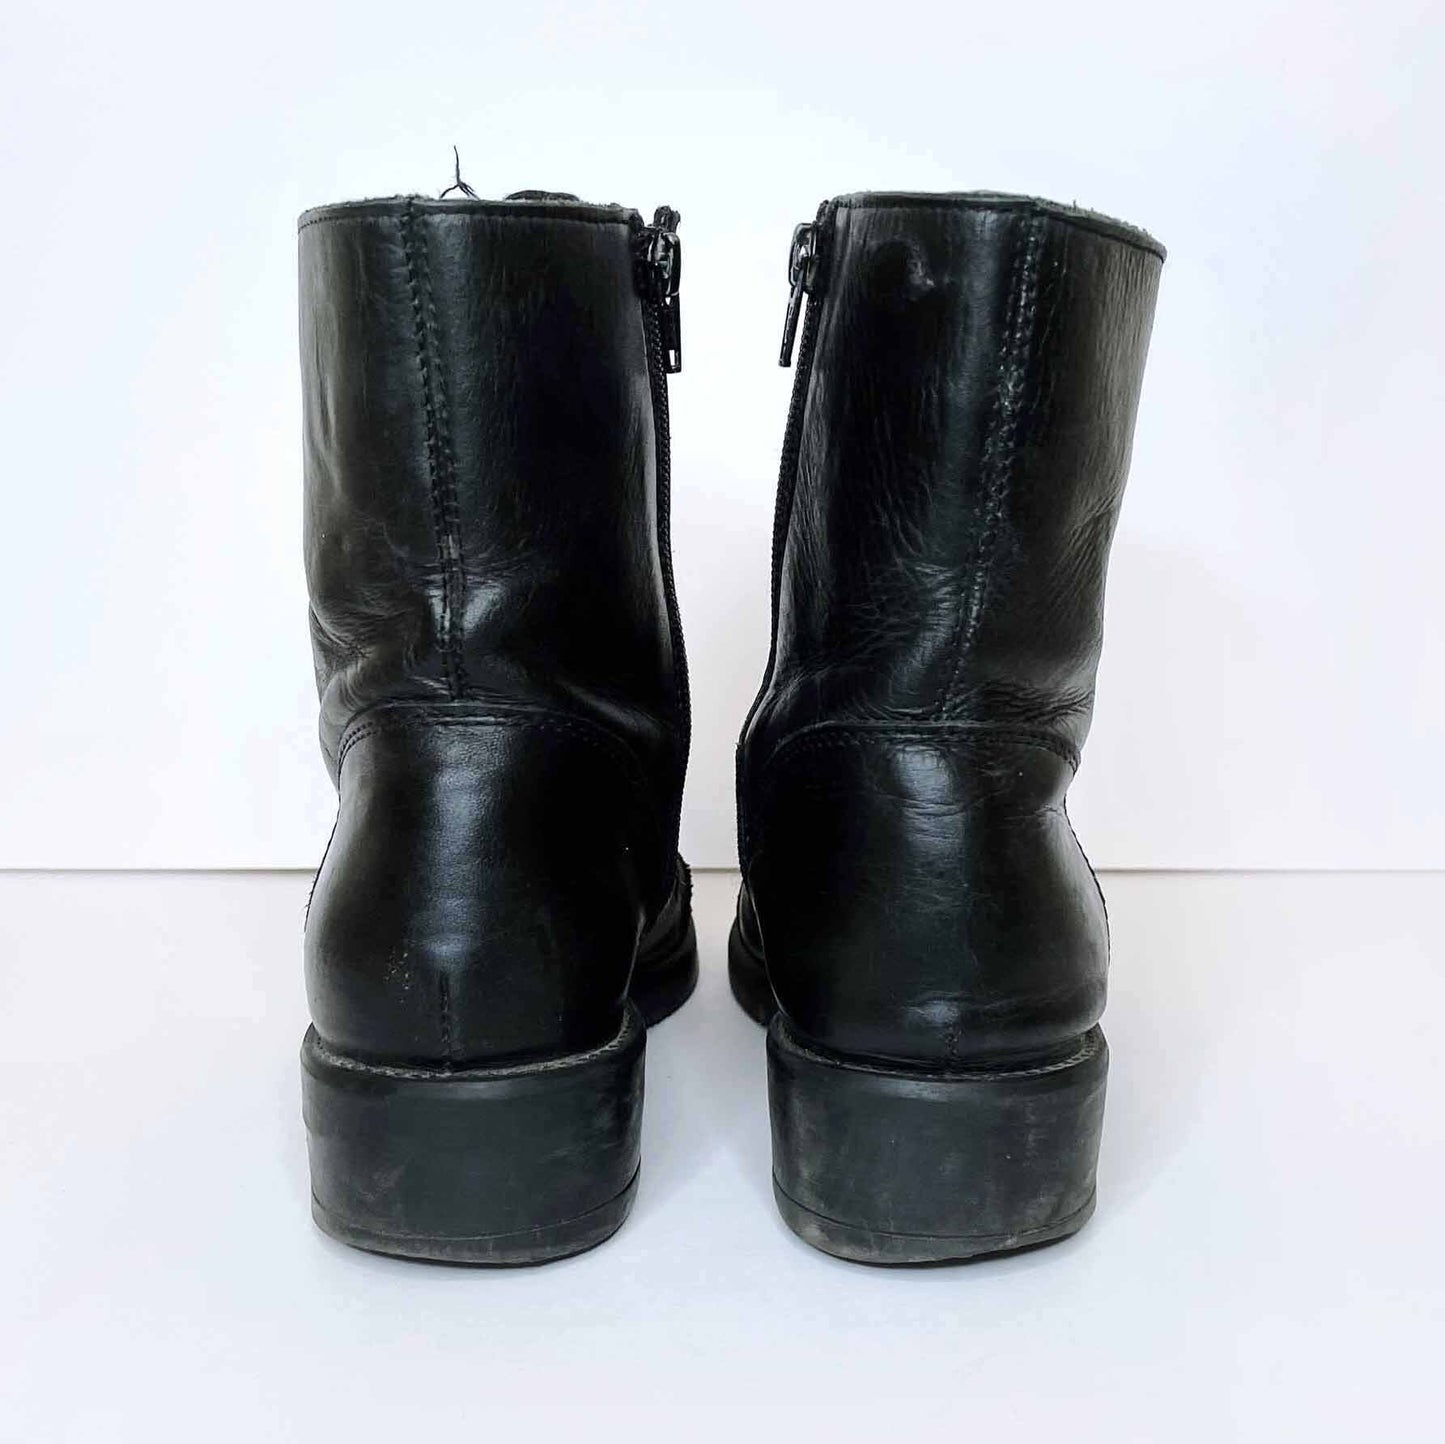 aldo black leather lace-up moto boots with studded toe - size 38